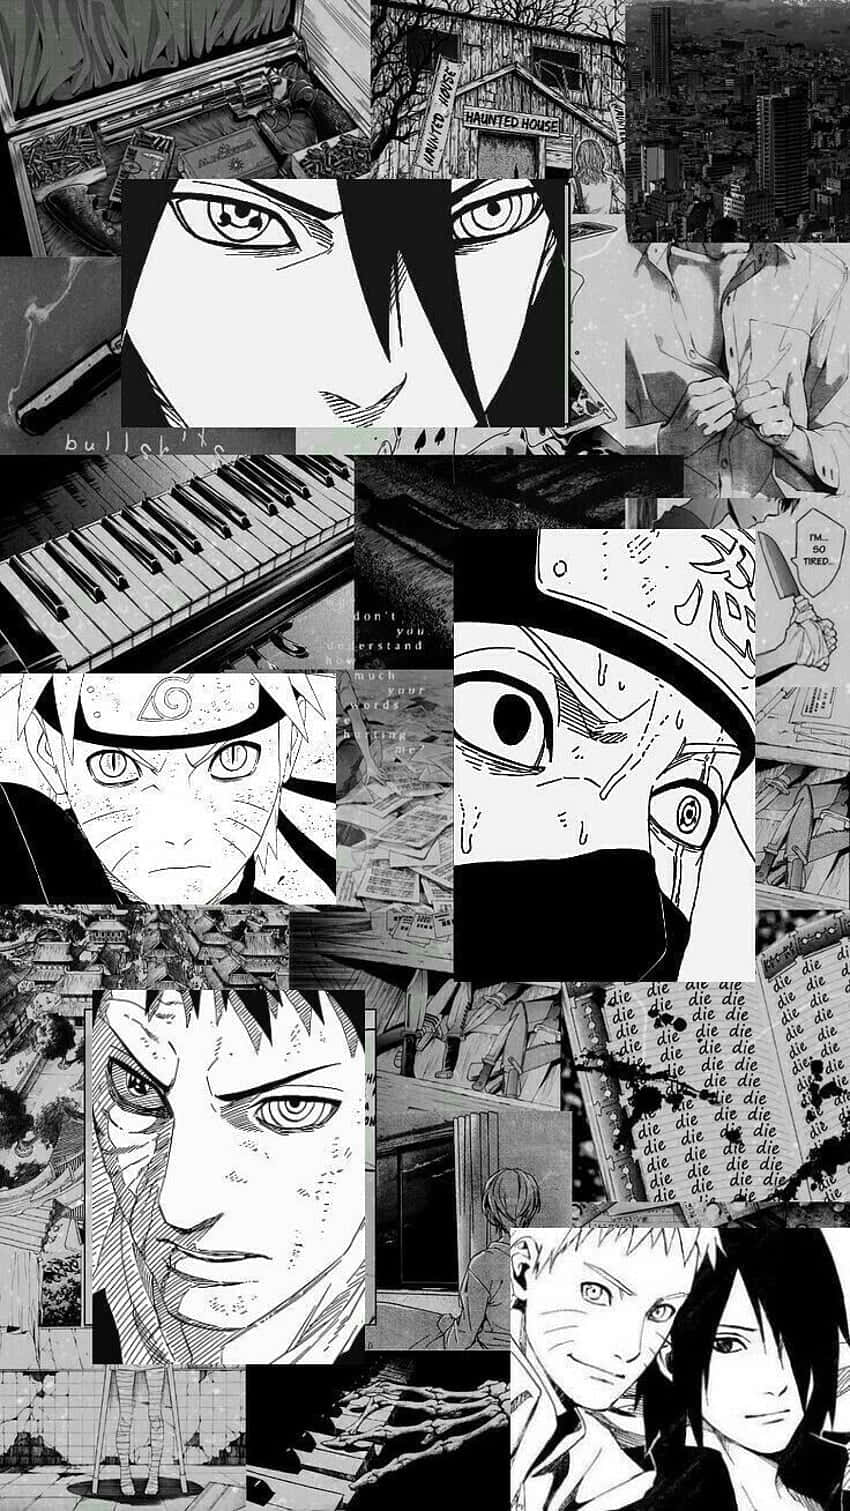 A Collage Of Anime Faces And Music